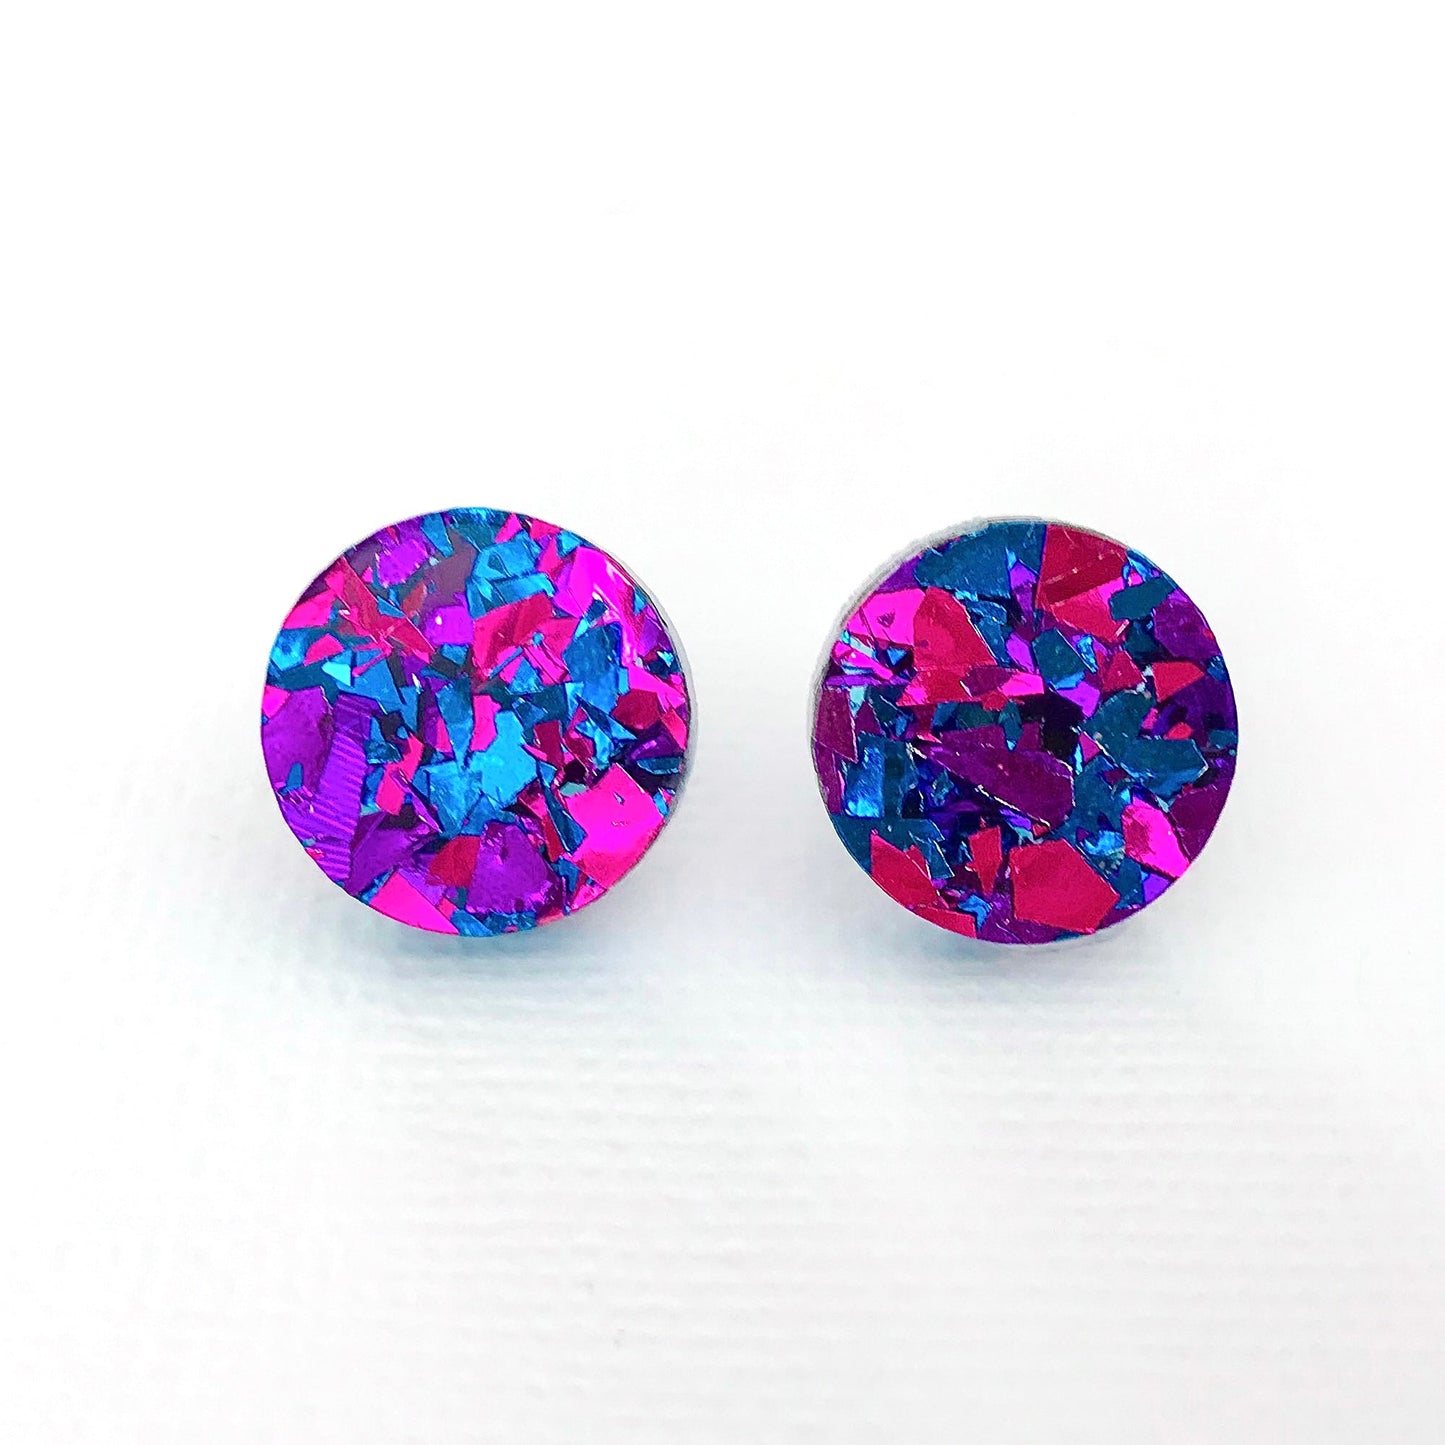 Small Round Acrylic Studs (15mm) - Midnight Blue Shard Glitter - Lacey Lou Sparkles